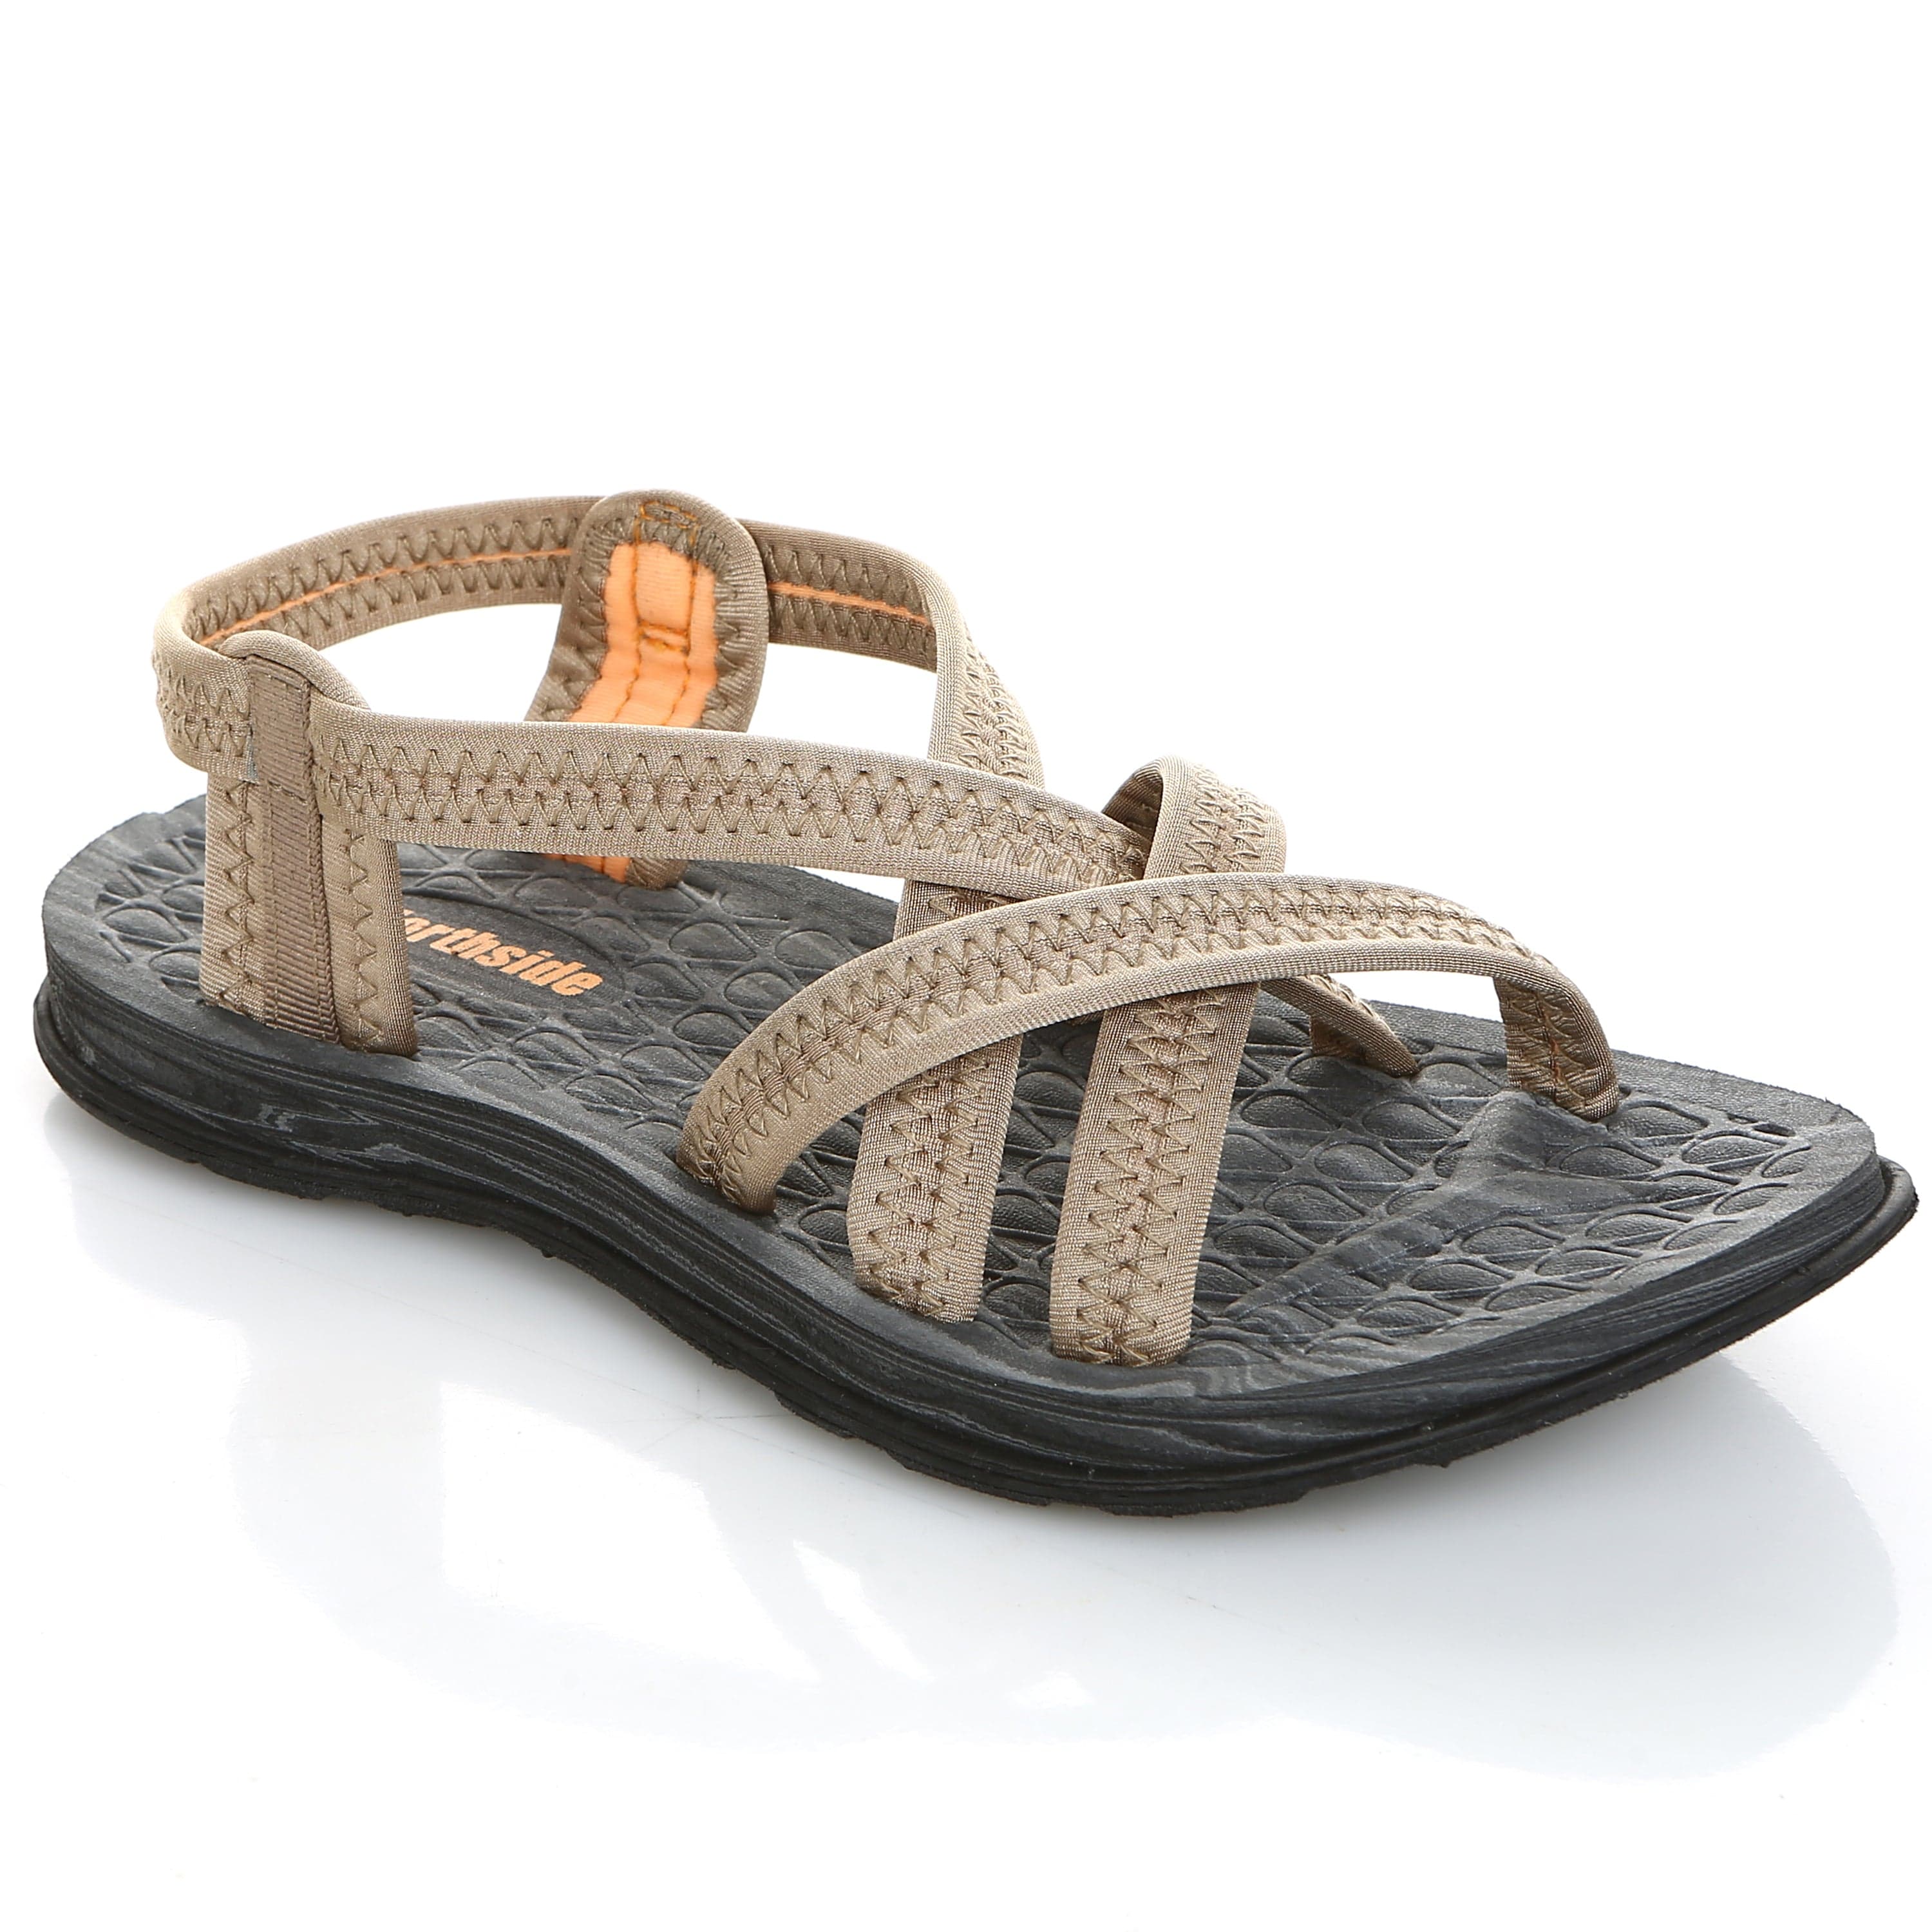 Buy MEGNYA Comfortable Summer Hiking Sandals for Ladies, Arch Support  Rubber Sole Slide Sandals for walking, Lightweigh Warerproof Beach Sandals  for Pool Water Travel Black Size 8 Online at Lowest Price Ever